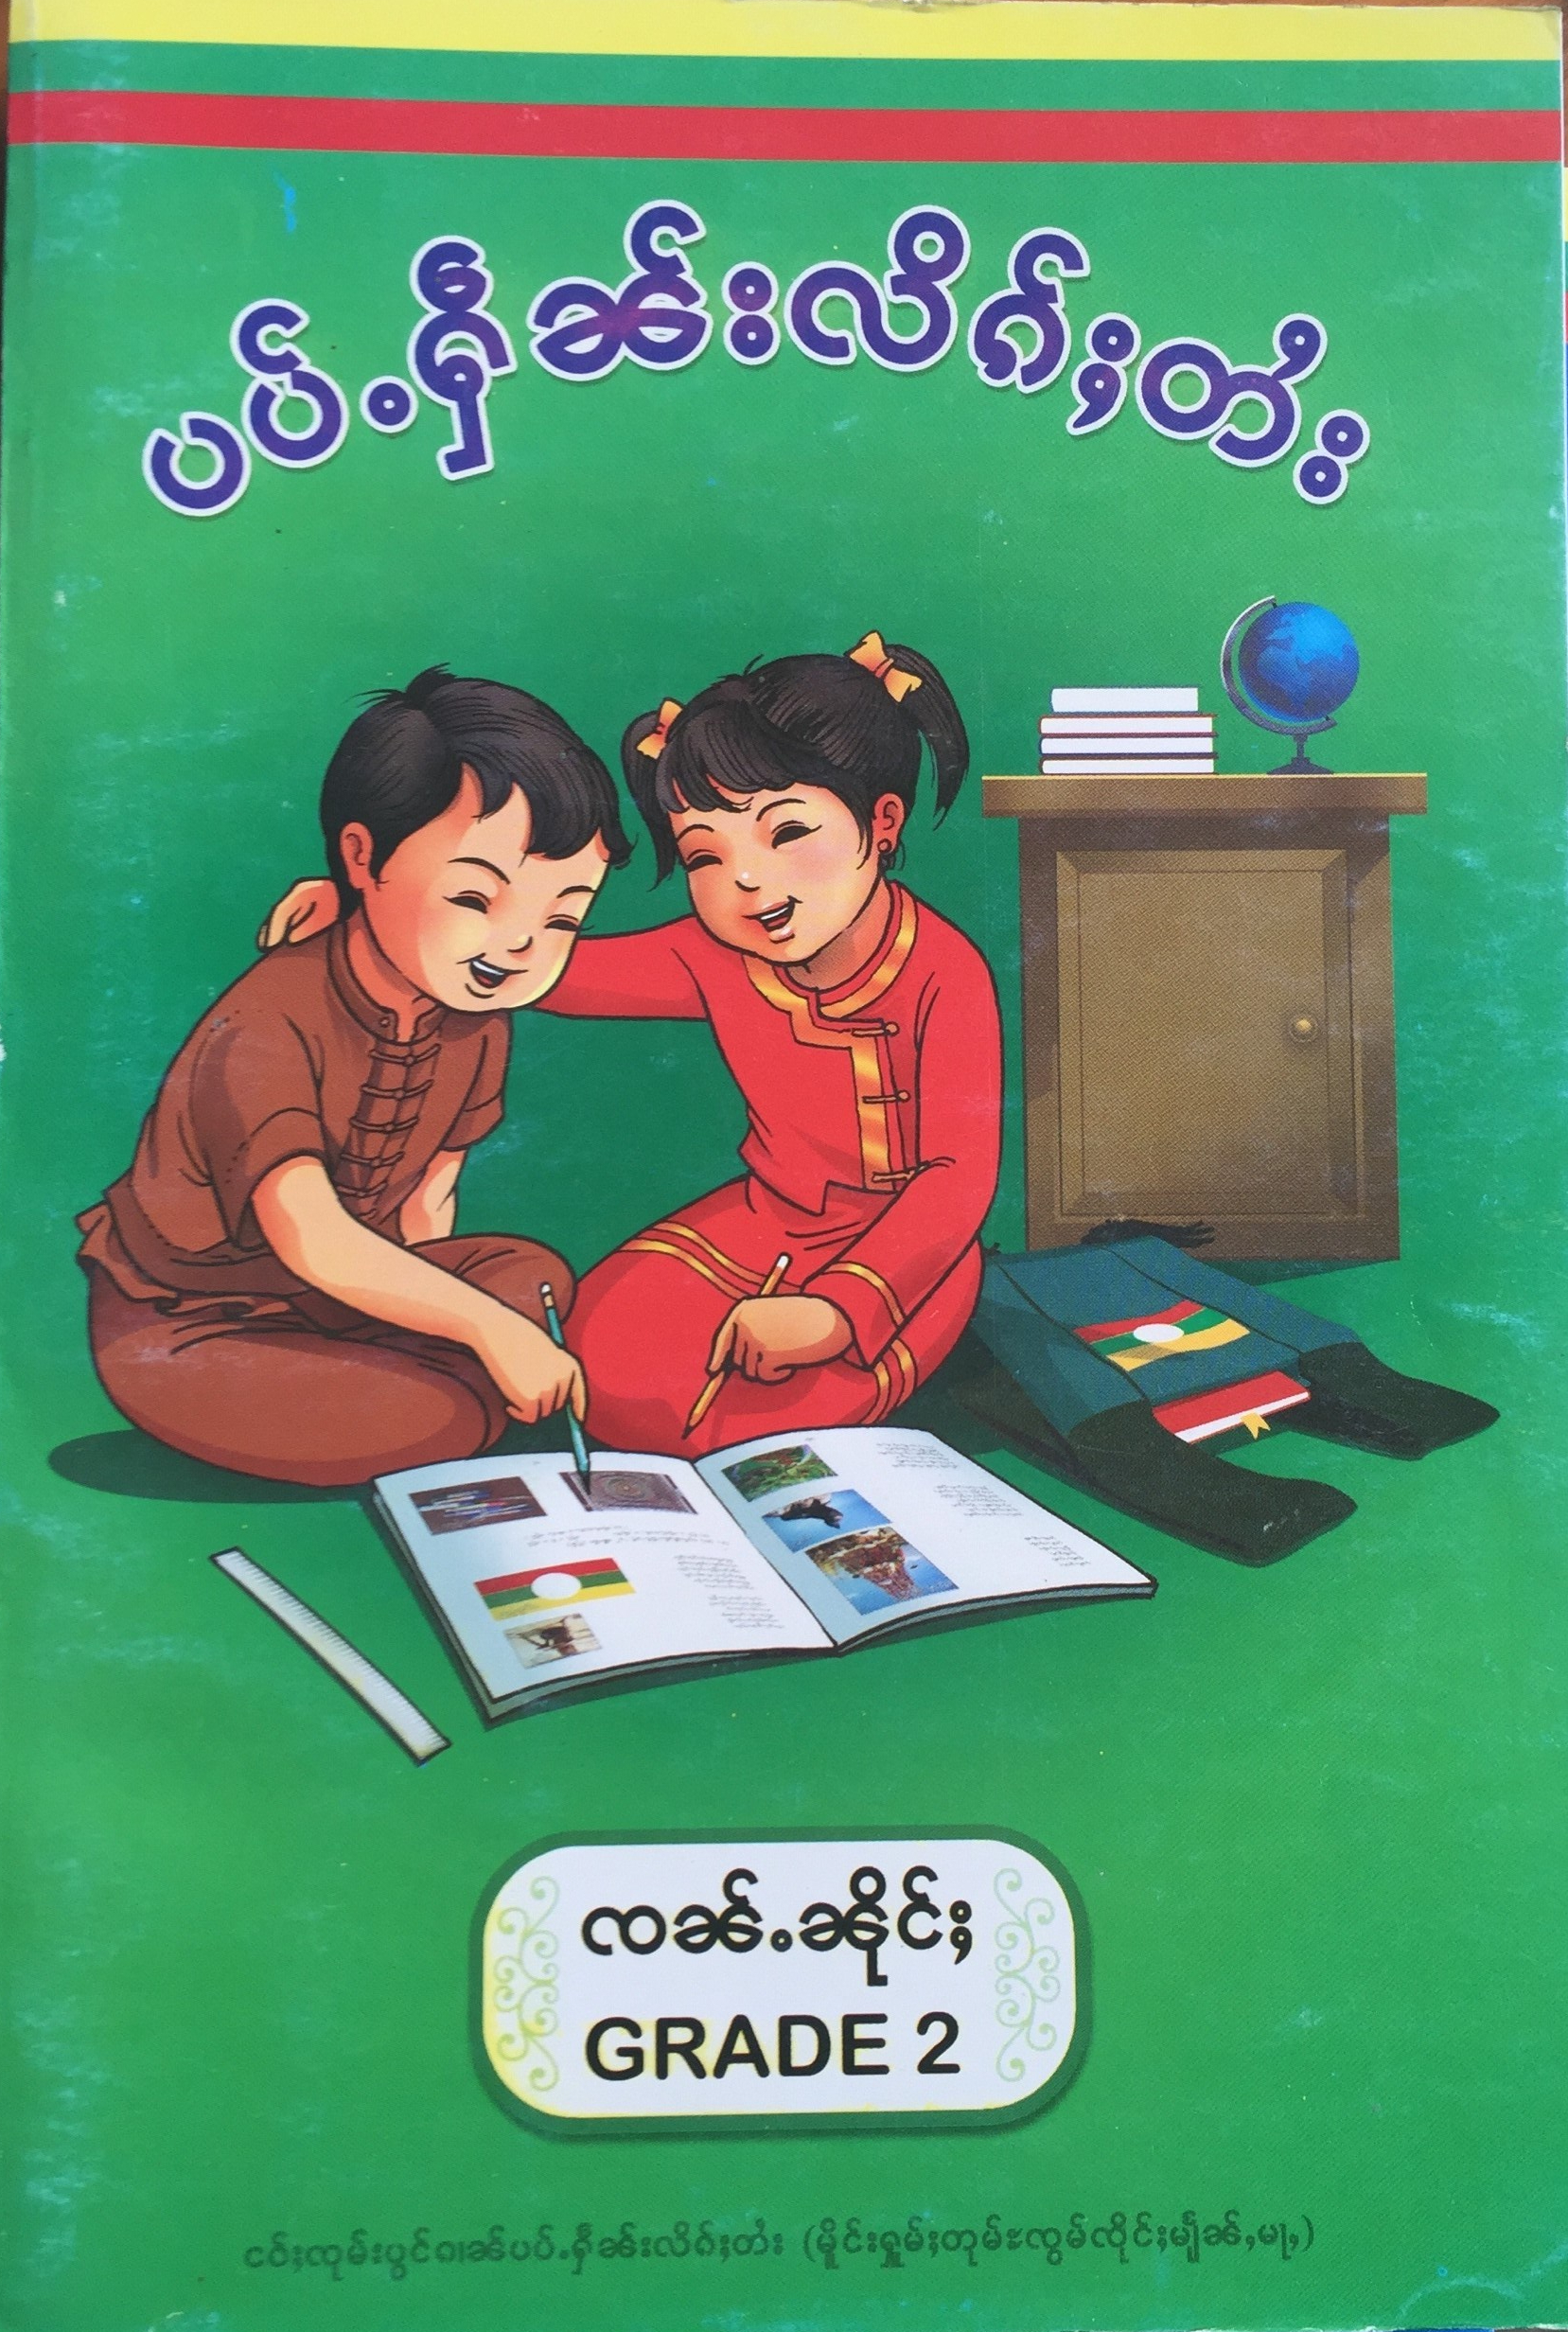 Textbooks used in government schools for the teaching of Shan.